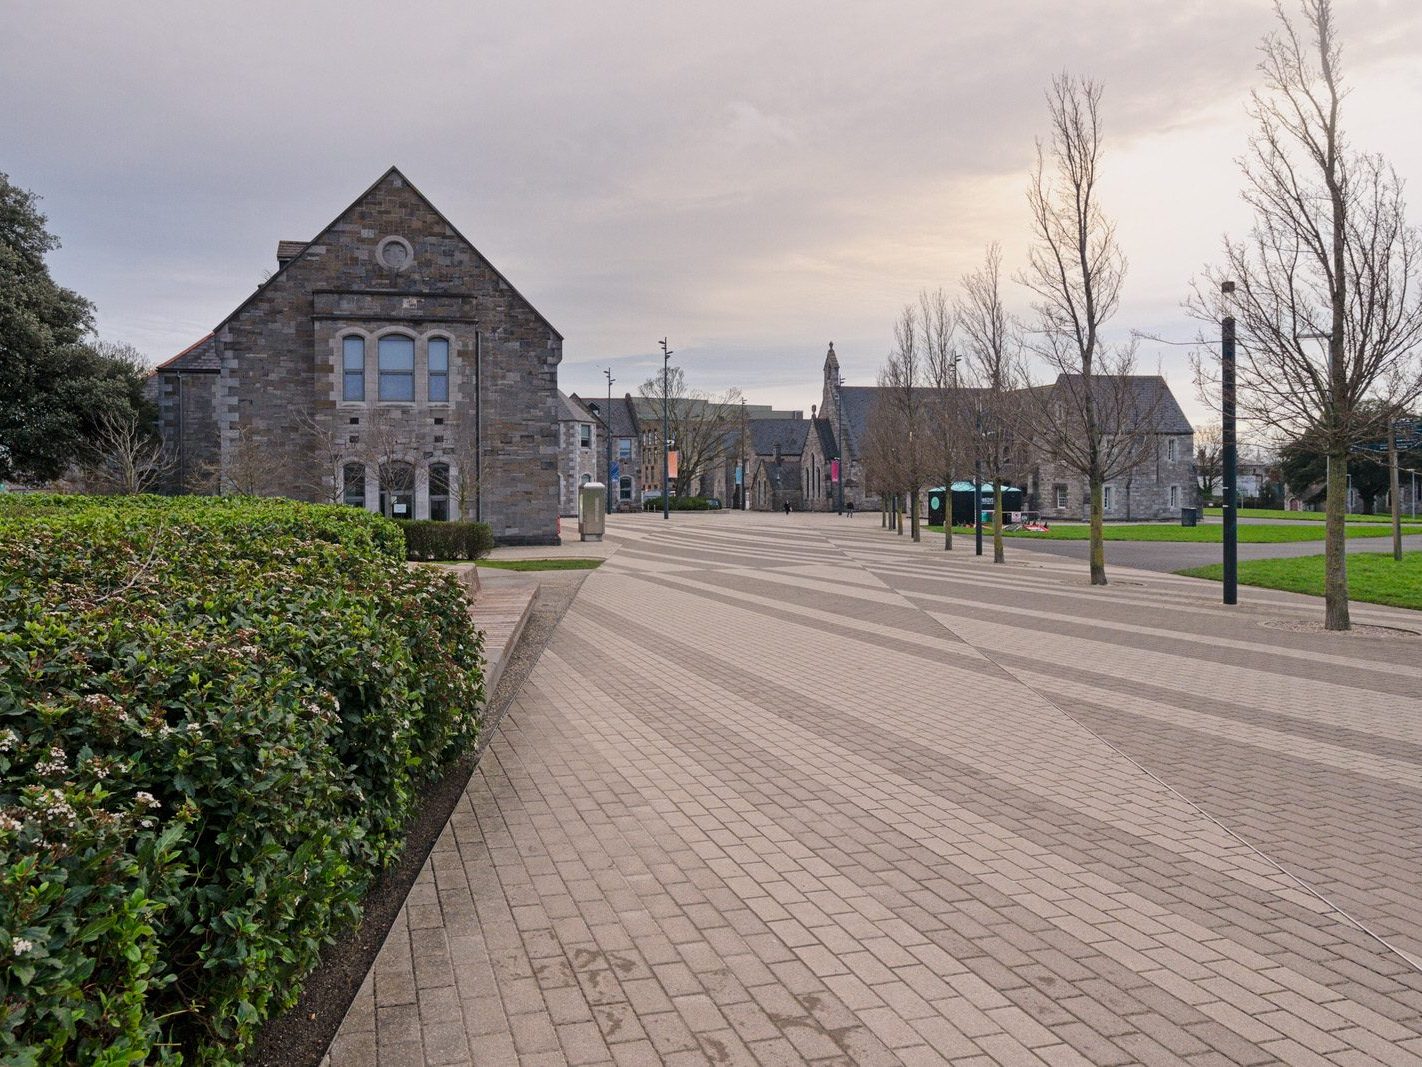 I VISITED THE GRANGEGORMAN UNIVERSITY CAMPUS [THERE WAS NO SIGN OF CHRISTMAS CELEBRATIONS THERE]-226054-1